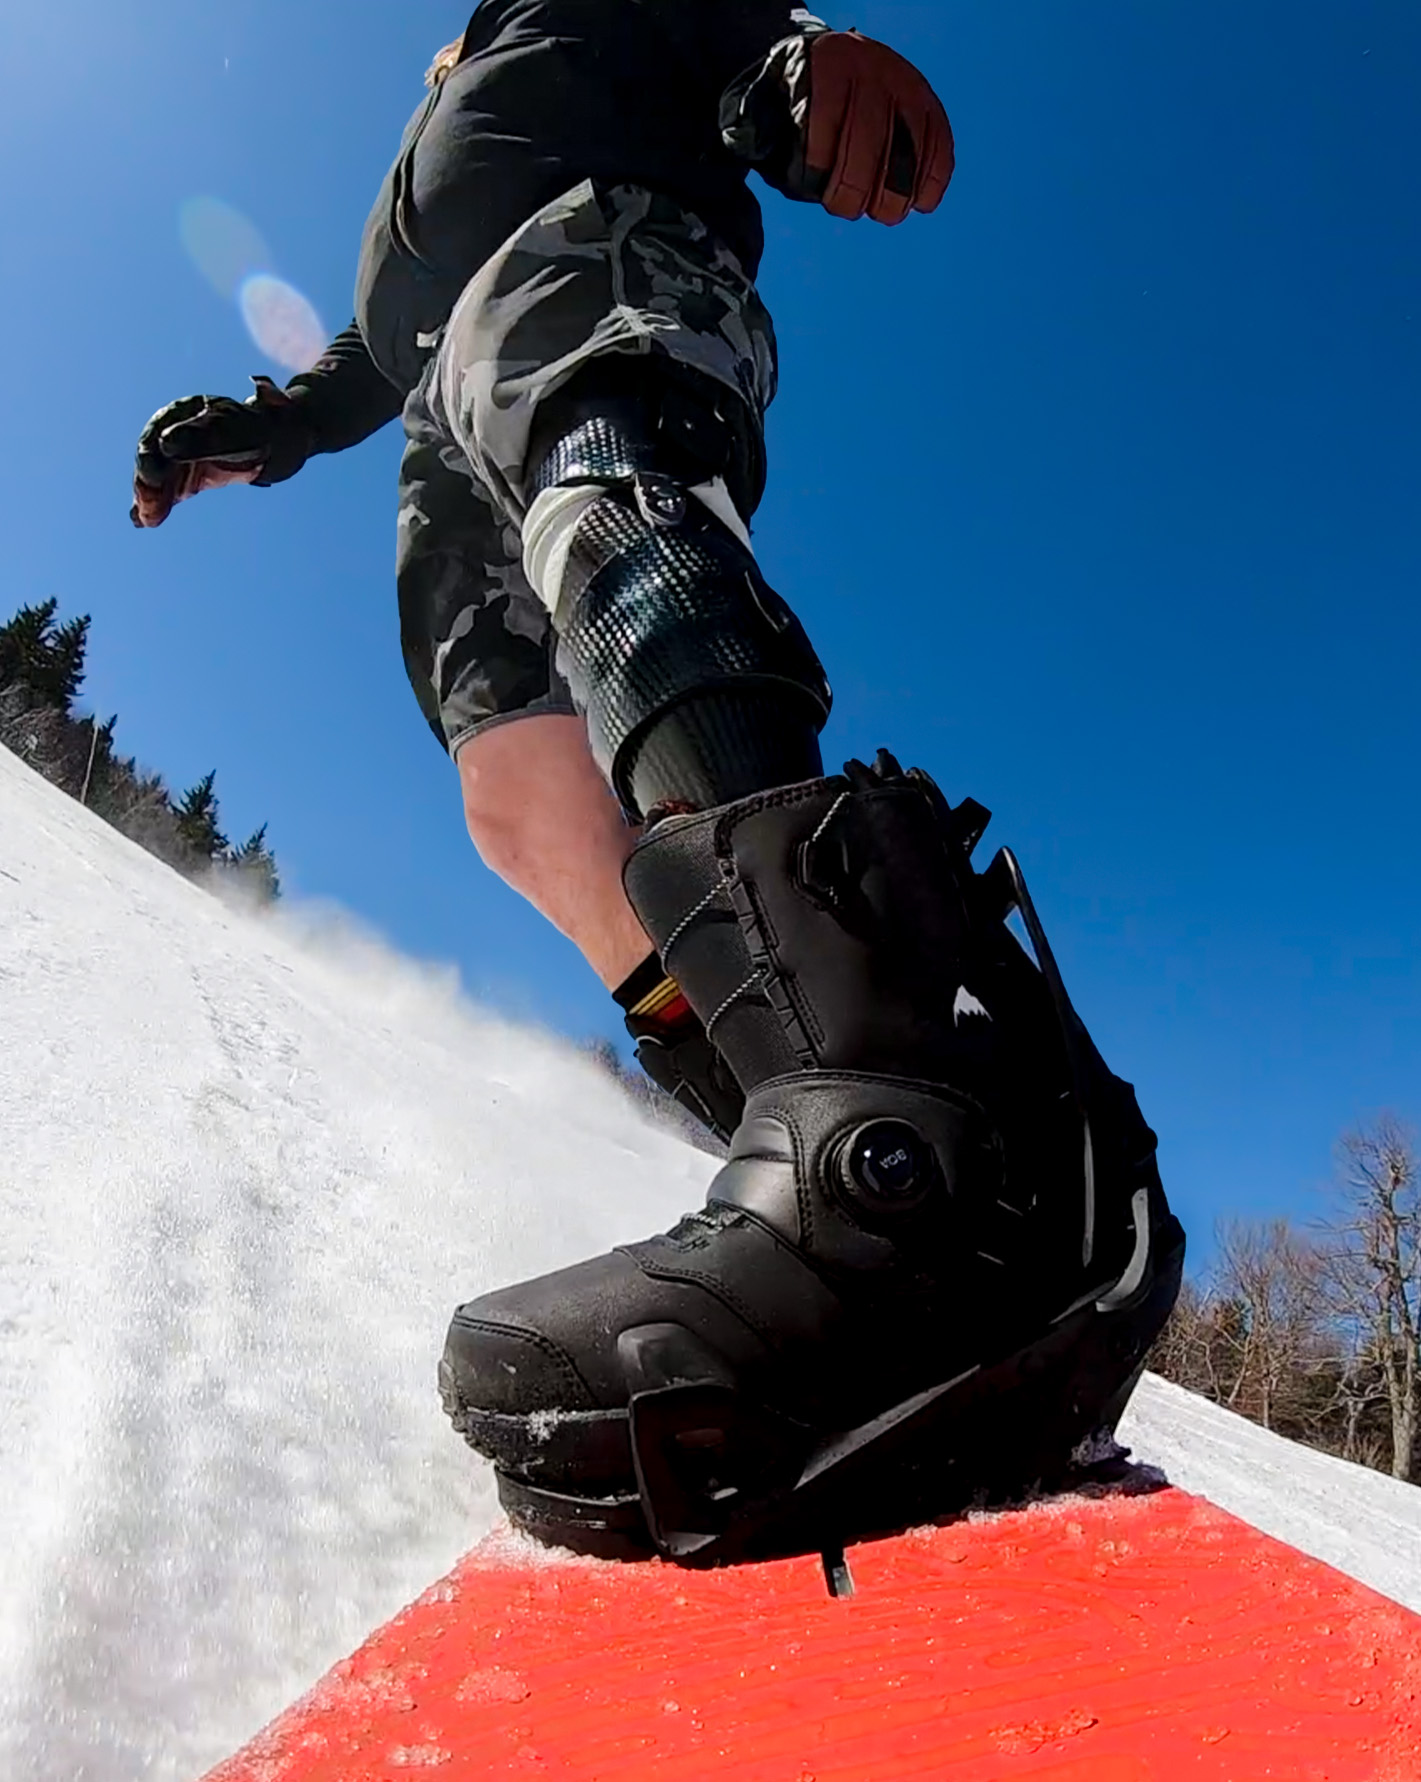 snowboarding with a prosthetic leg